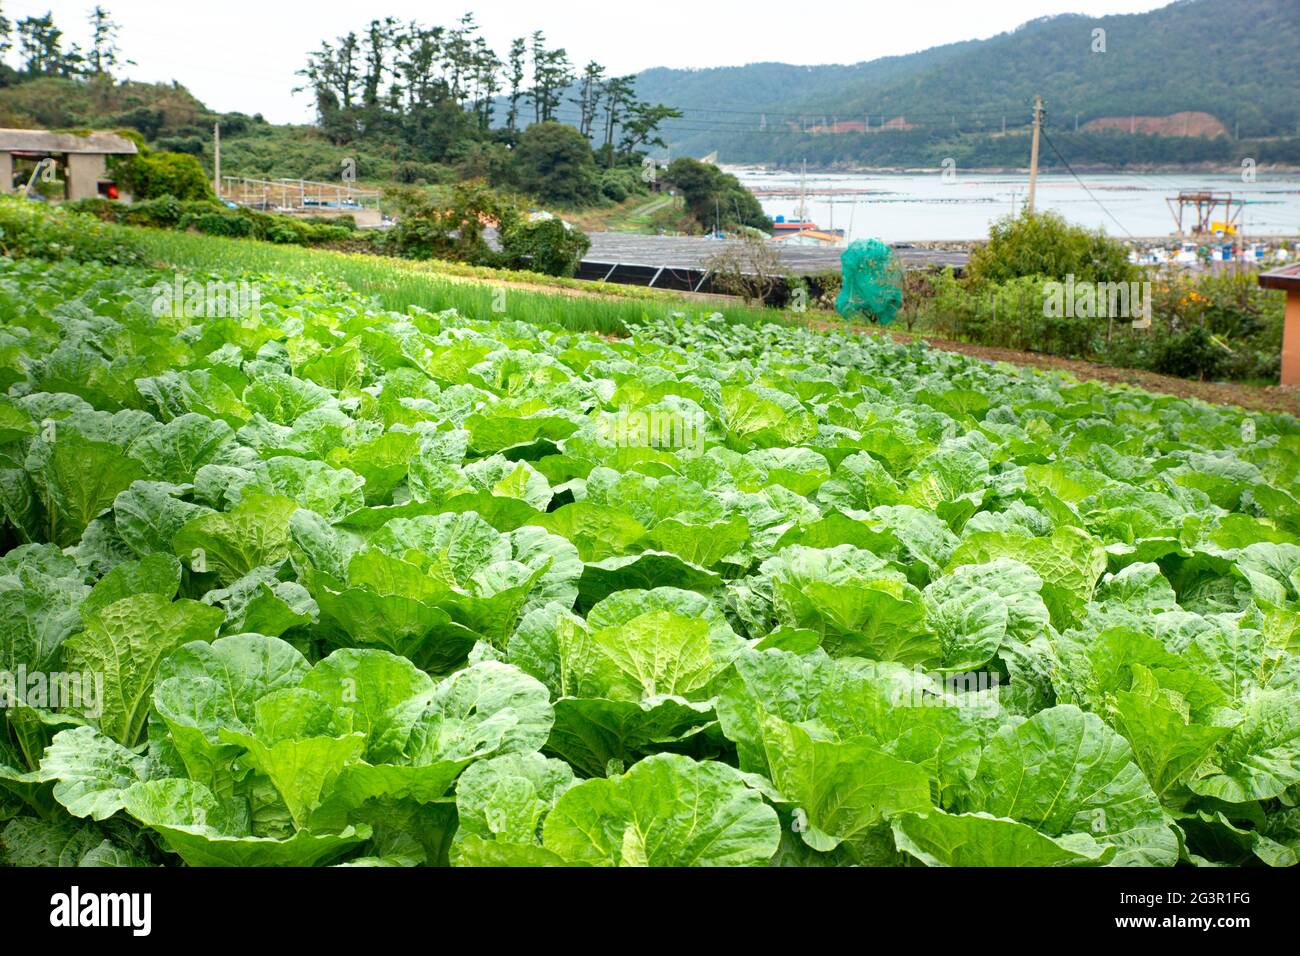 The village agriculture in South Korea Stock Photo